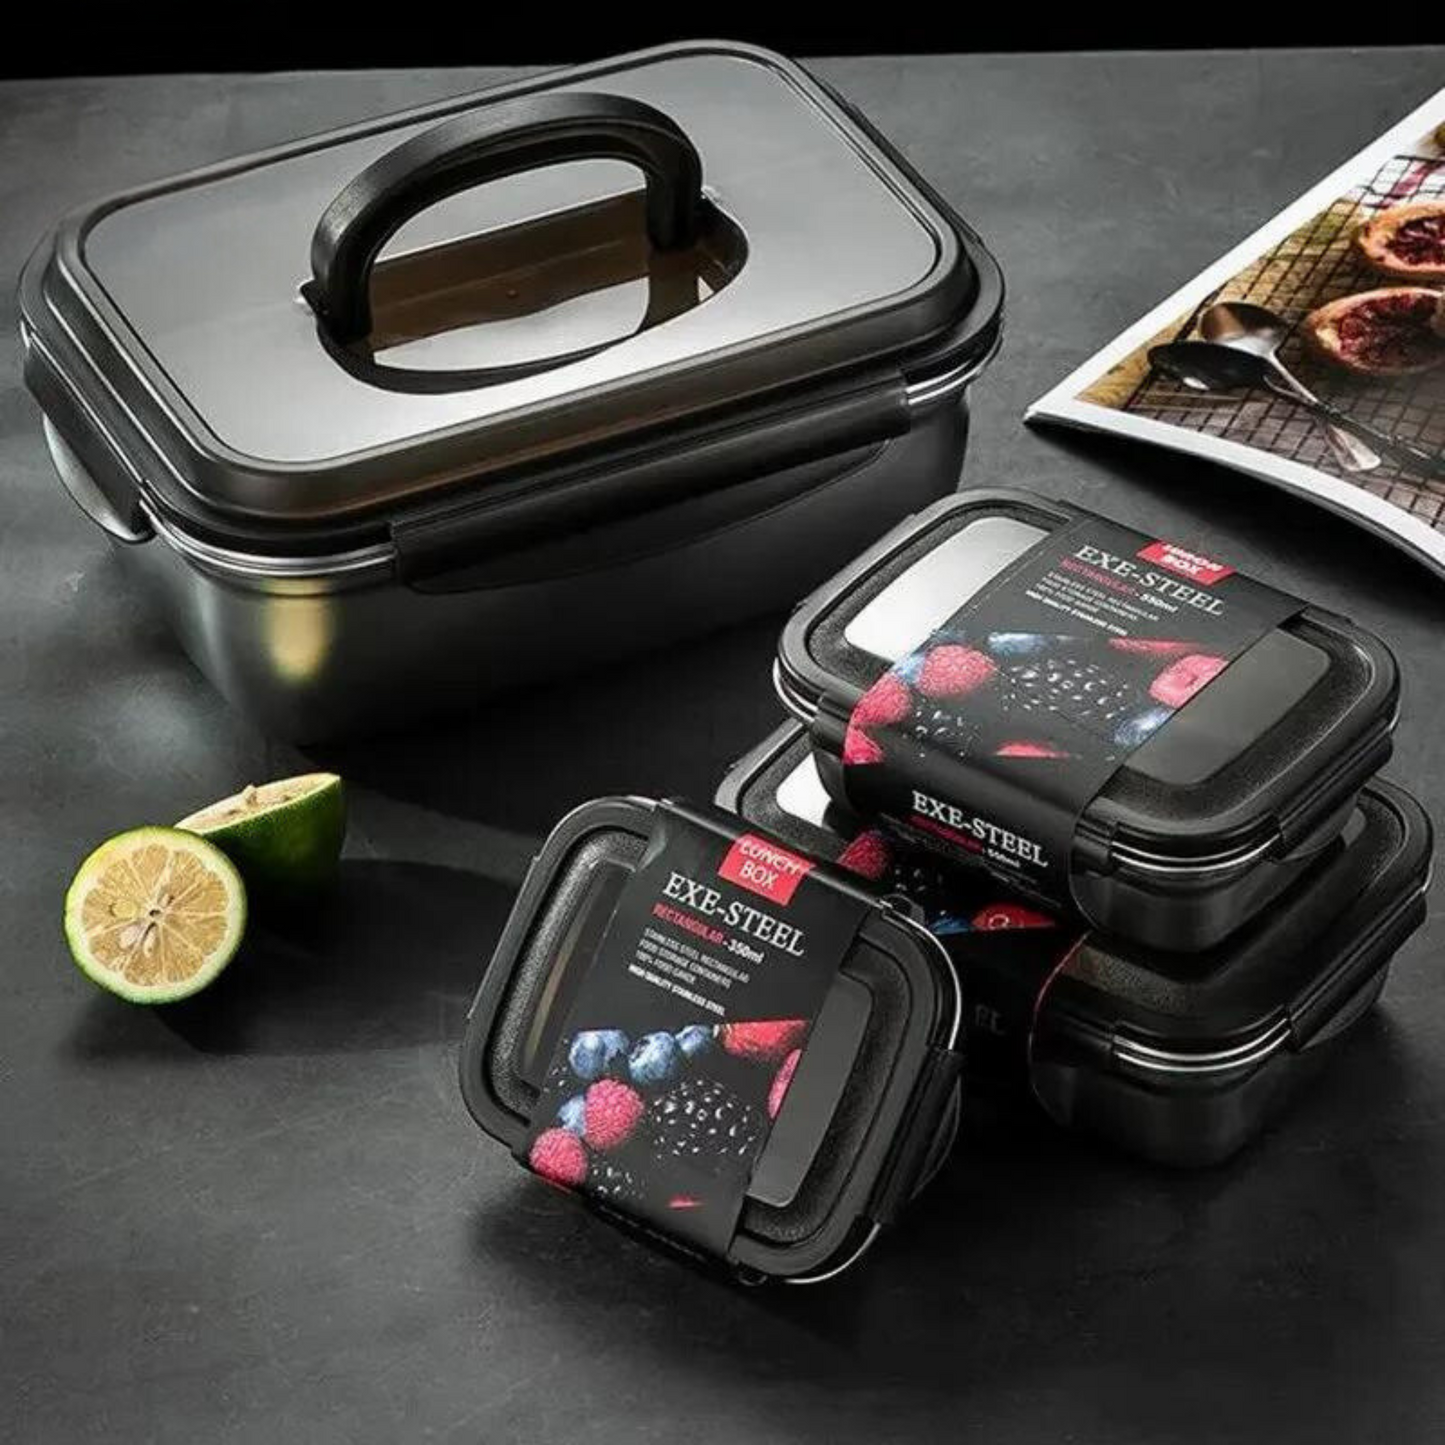 Large Capacity Stainless Steel Outdoor Portable Lunch Bento Box: Three stacked lunch bento boxes with a lime in the background, showcasing their eco-friendly and reusable design. These bento lunch boxes are ideal for family meals.